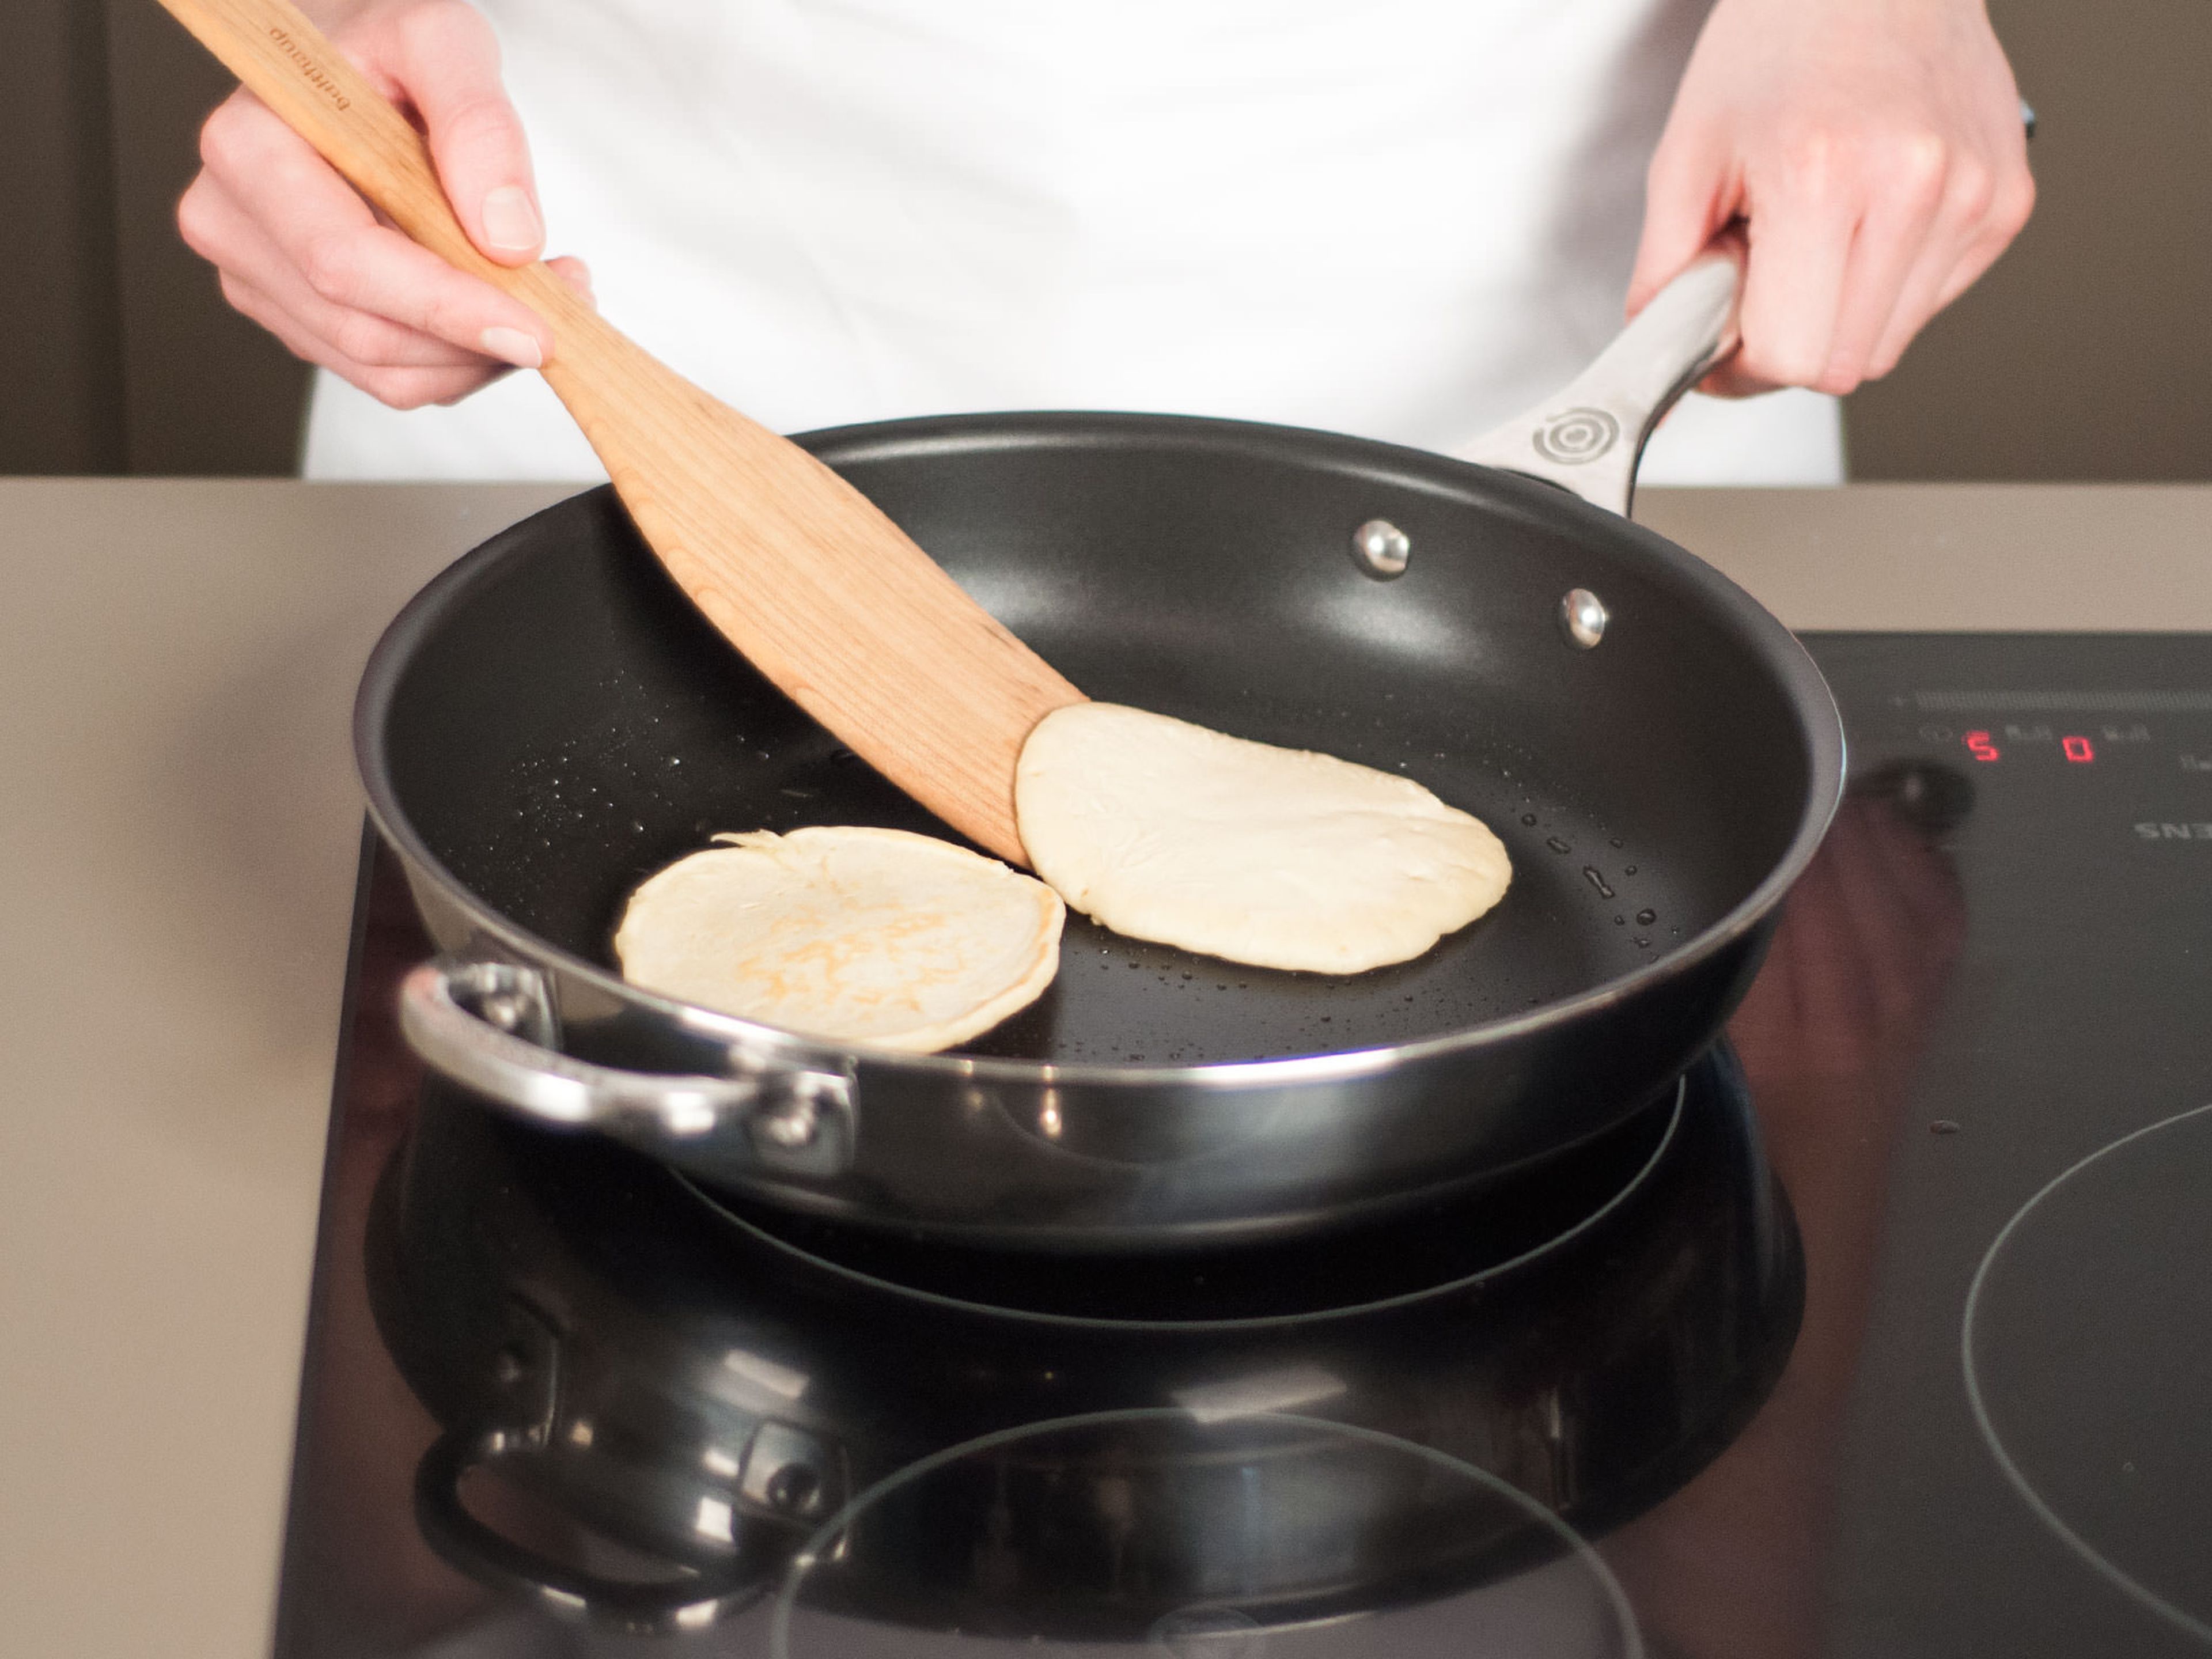 Brush a large, non-stick frying pan with some of the remaining melted butter over medium-low heat. Drop batter into the hot pan to form small rounds. Wait for approx. 2 – 3 min. until the sides set and small bubbles form on top of the blini rounds. Flip to cook for approx. 2 – 3 min. on the other side. Place on a serving plate.